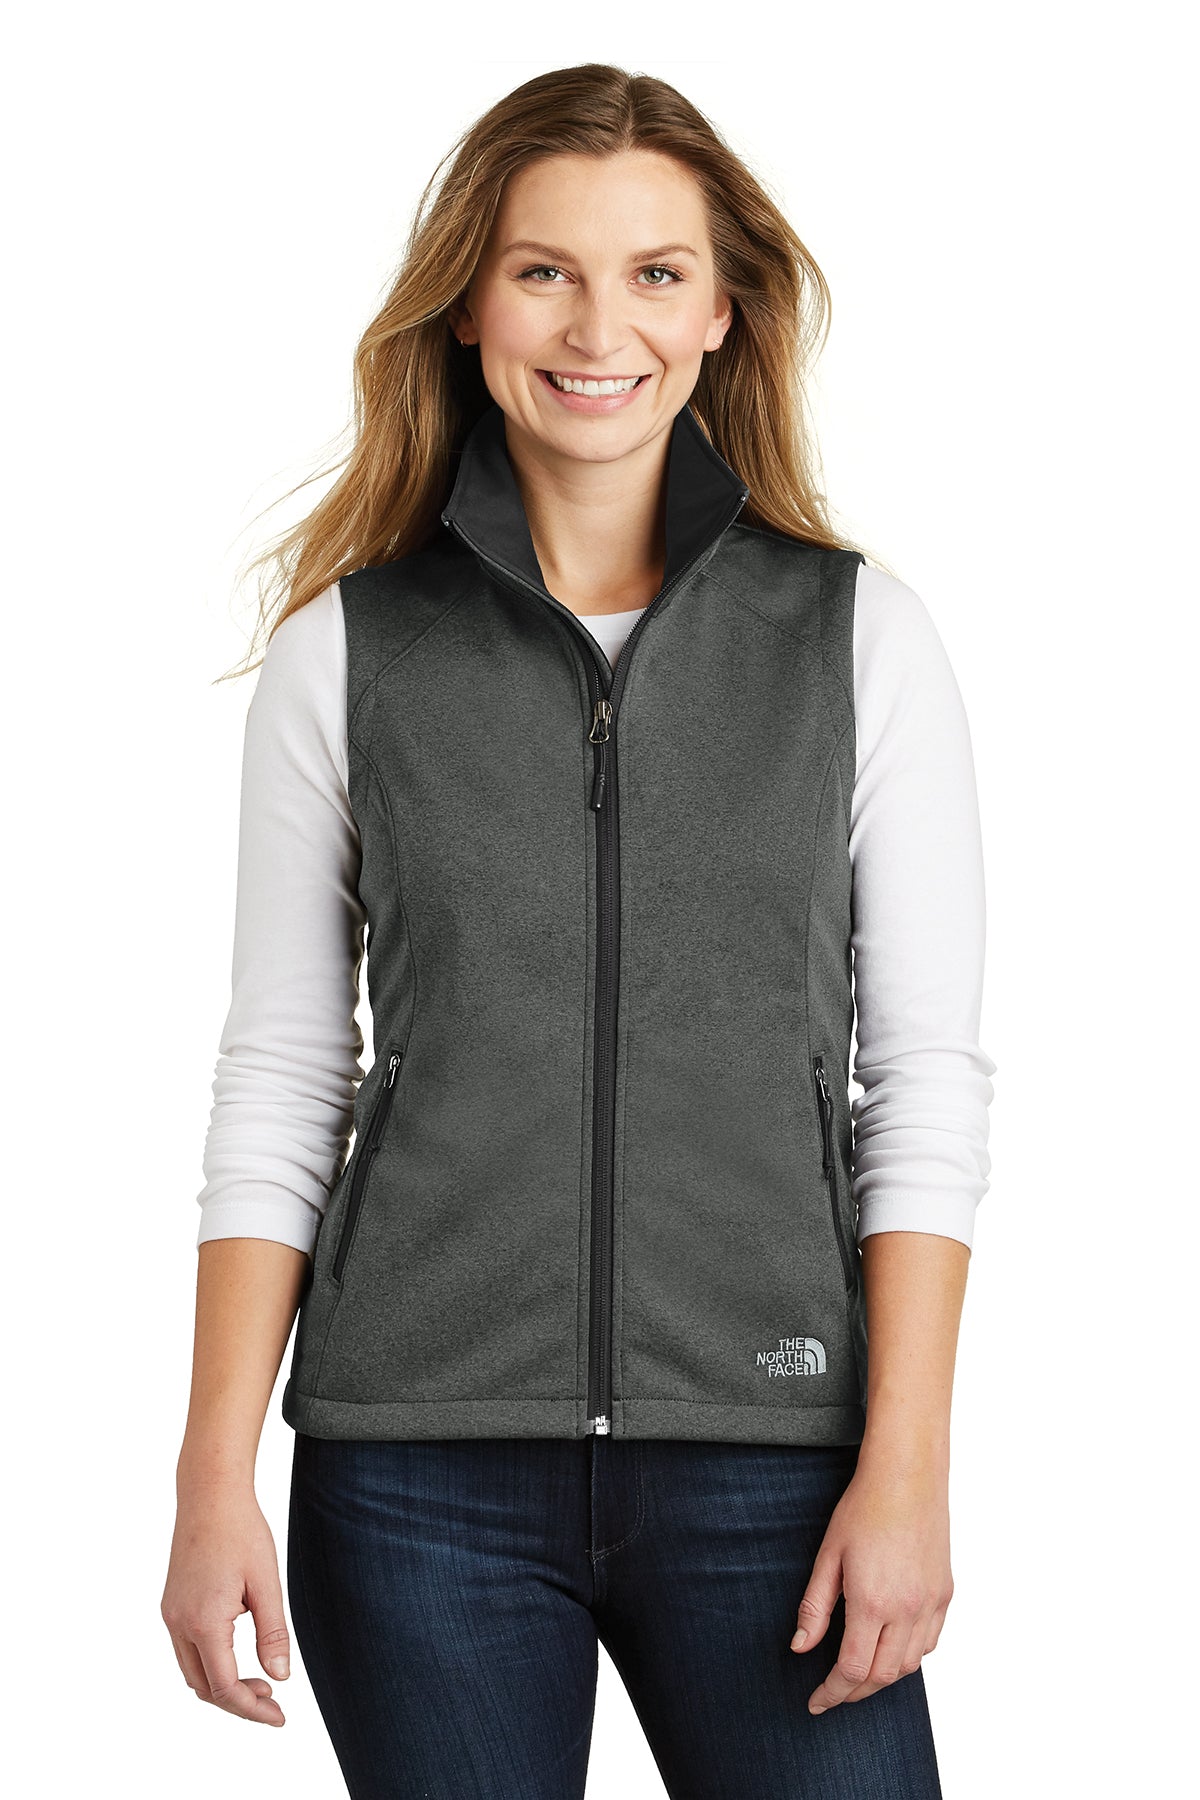 MEDSTAR NF0A3LH1 The North Face® Ladies Ridgewall Soft Shell Vest